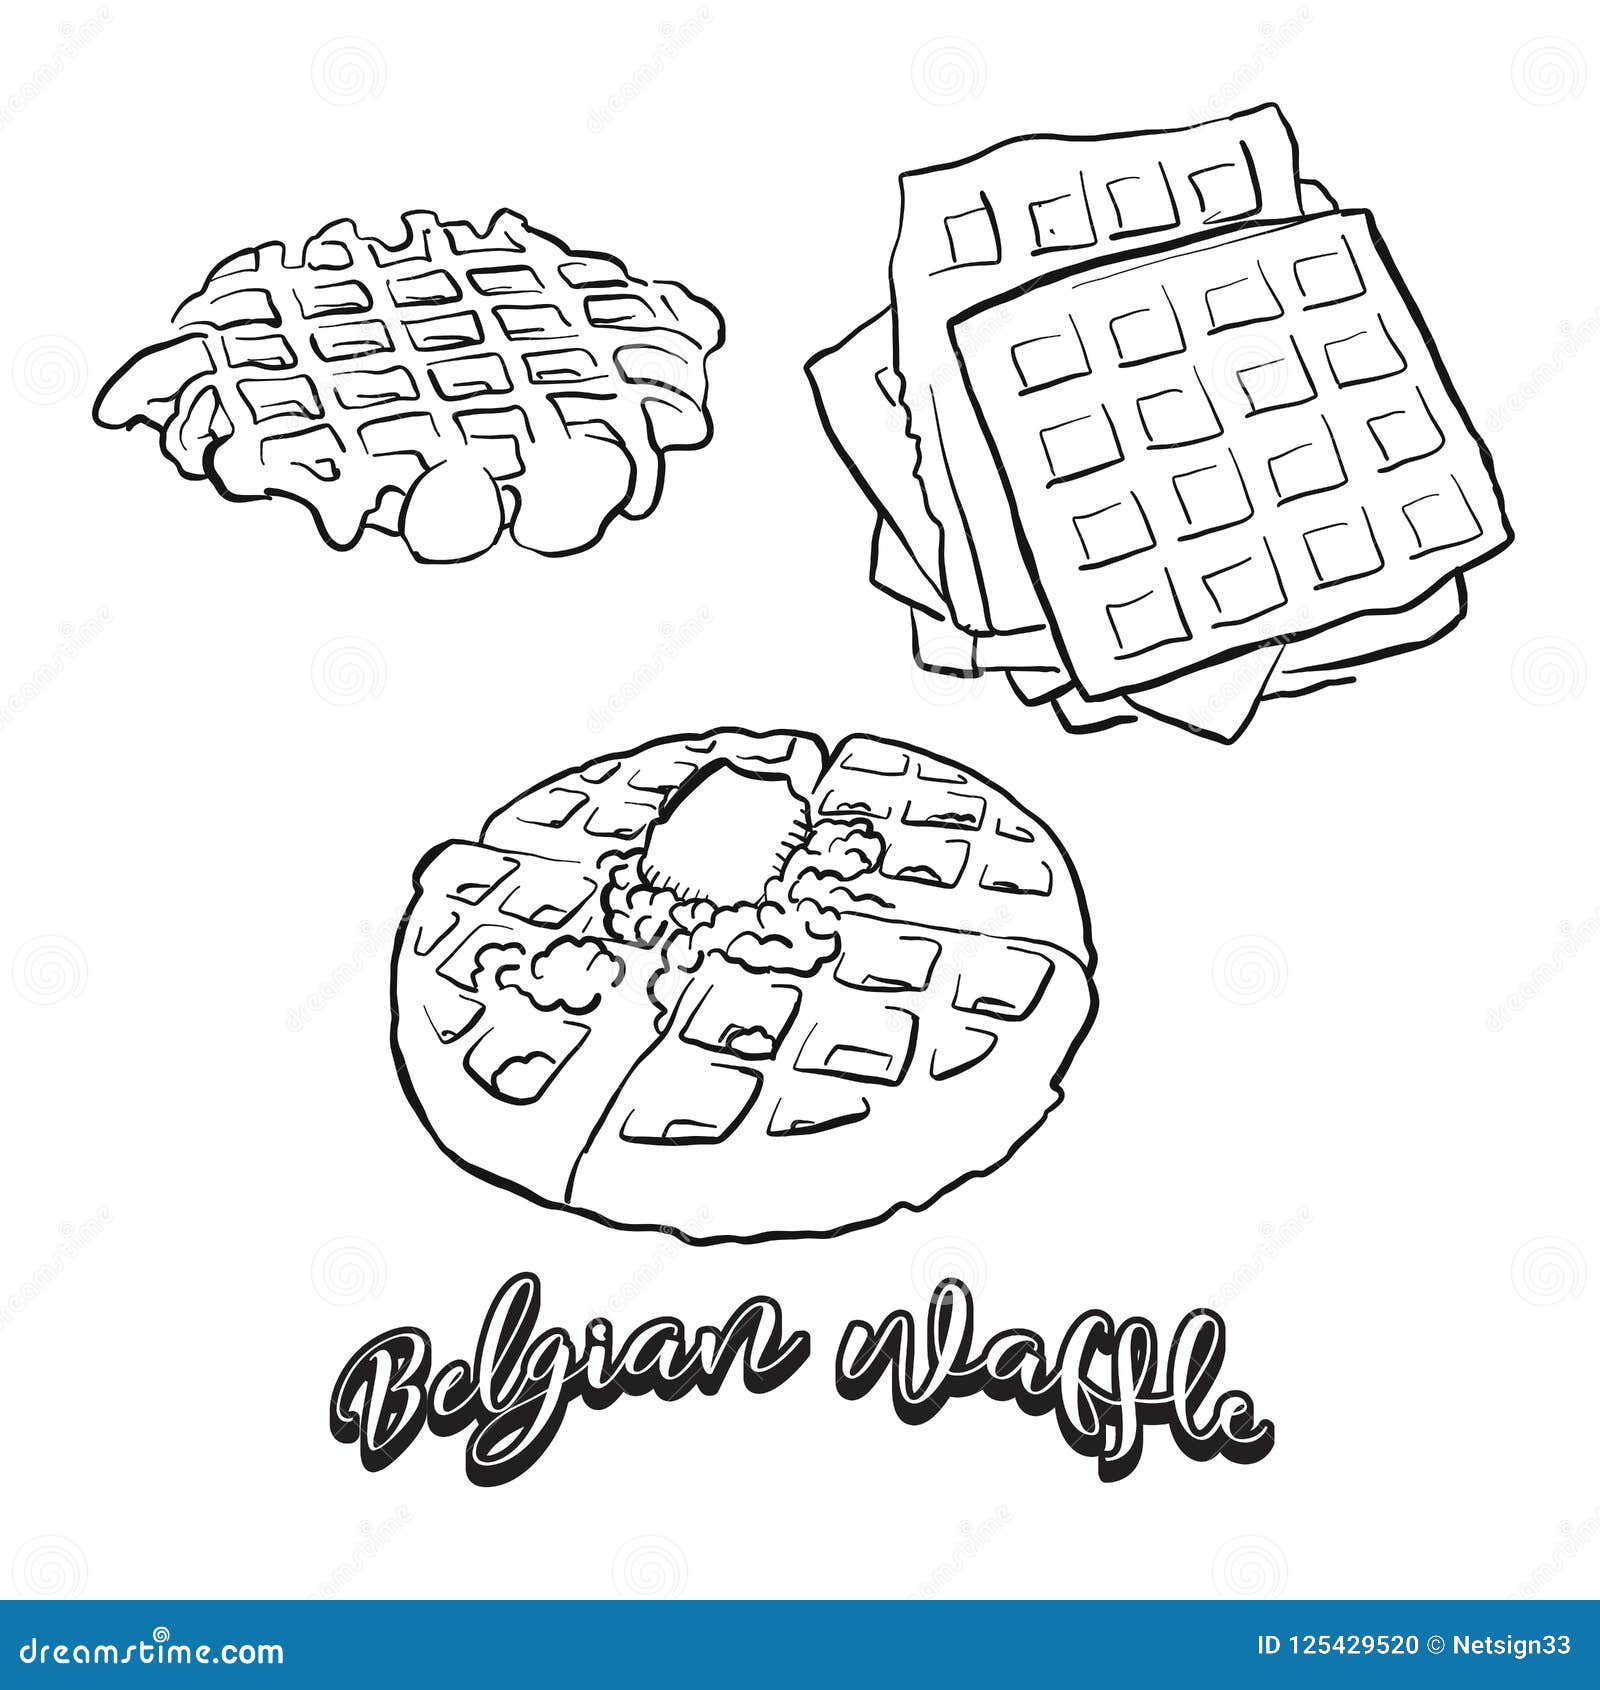 Hand Drawn Sketch Of Belgian Waffle Bread Stock Vector Illustration Of Design Bred